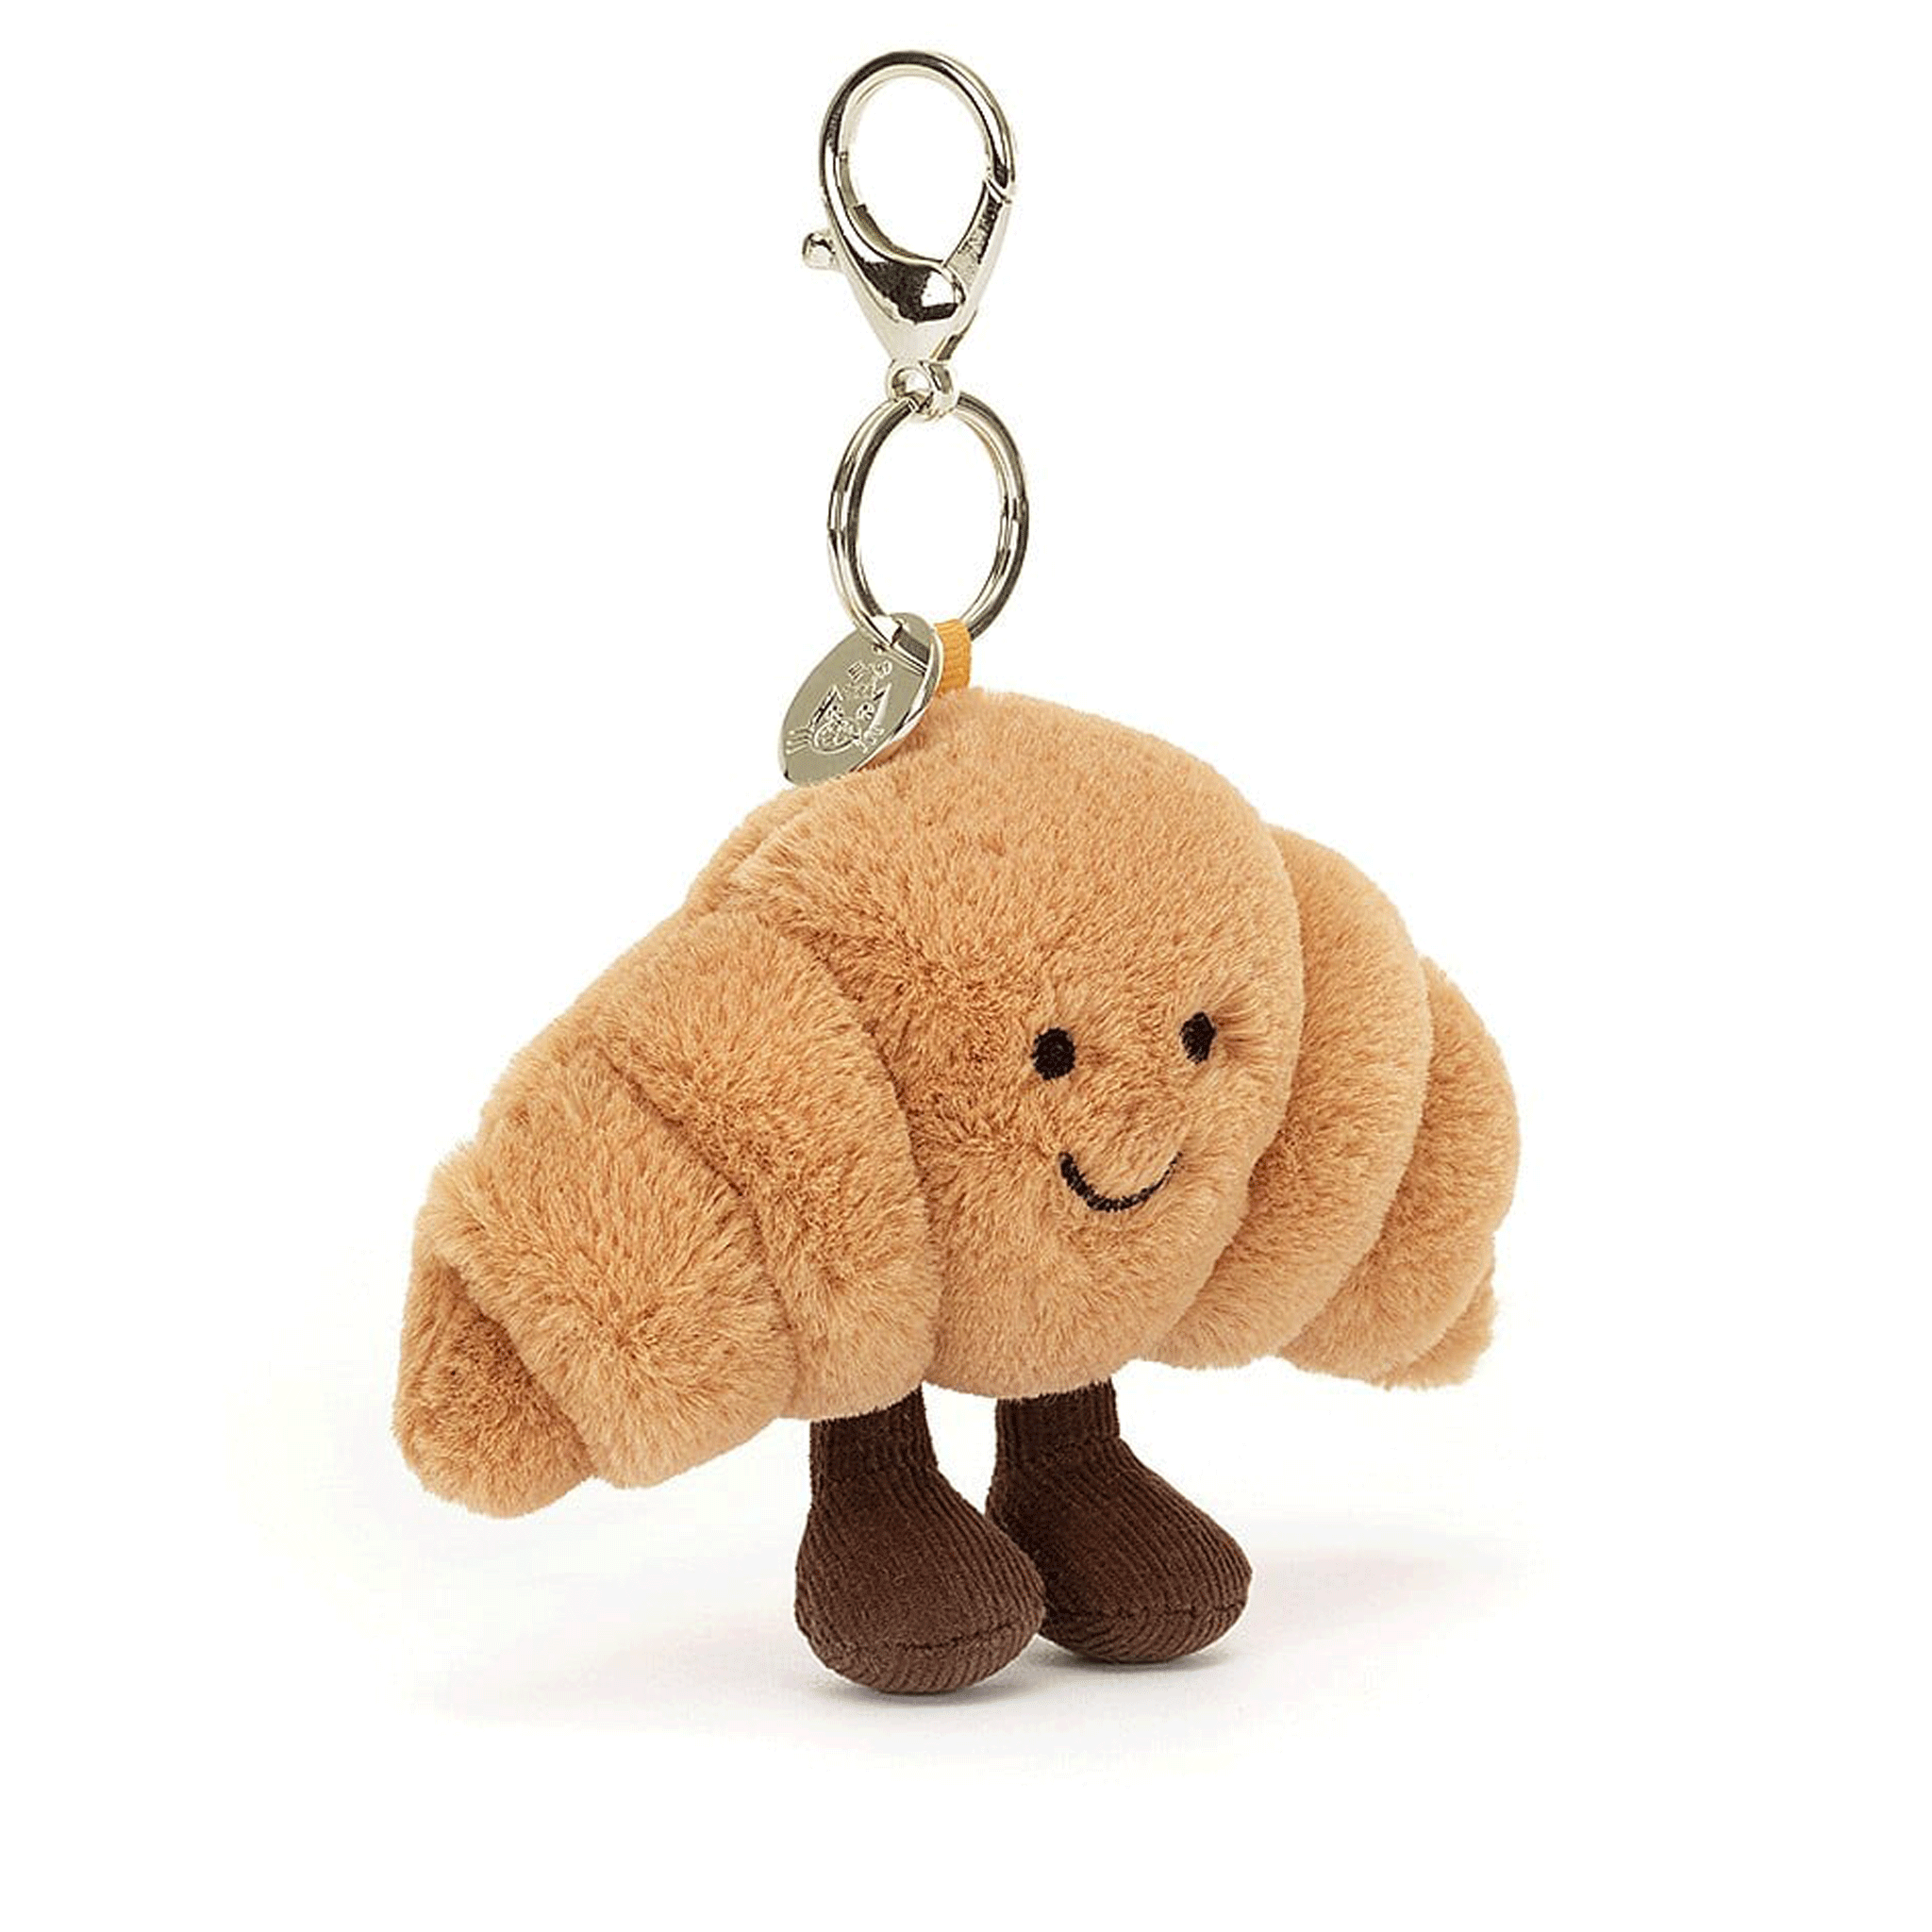 On a white background is a tan colored croissant stuffed toy with a silver clasp for attaching to a bag. 